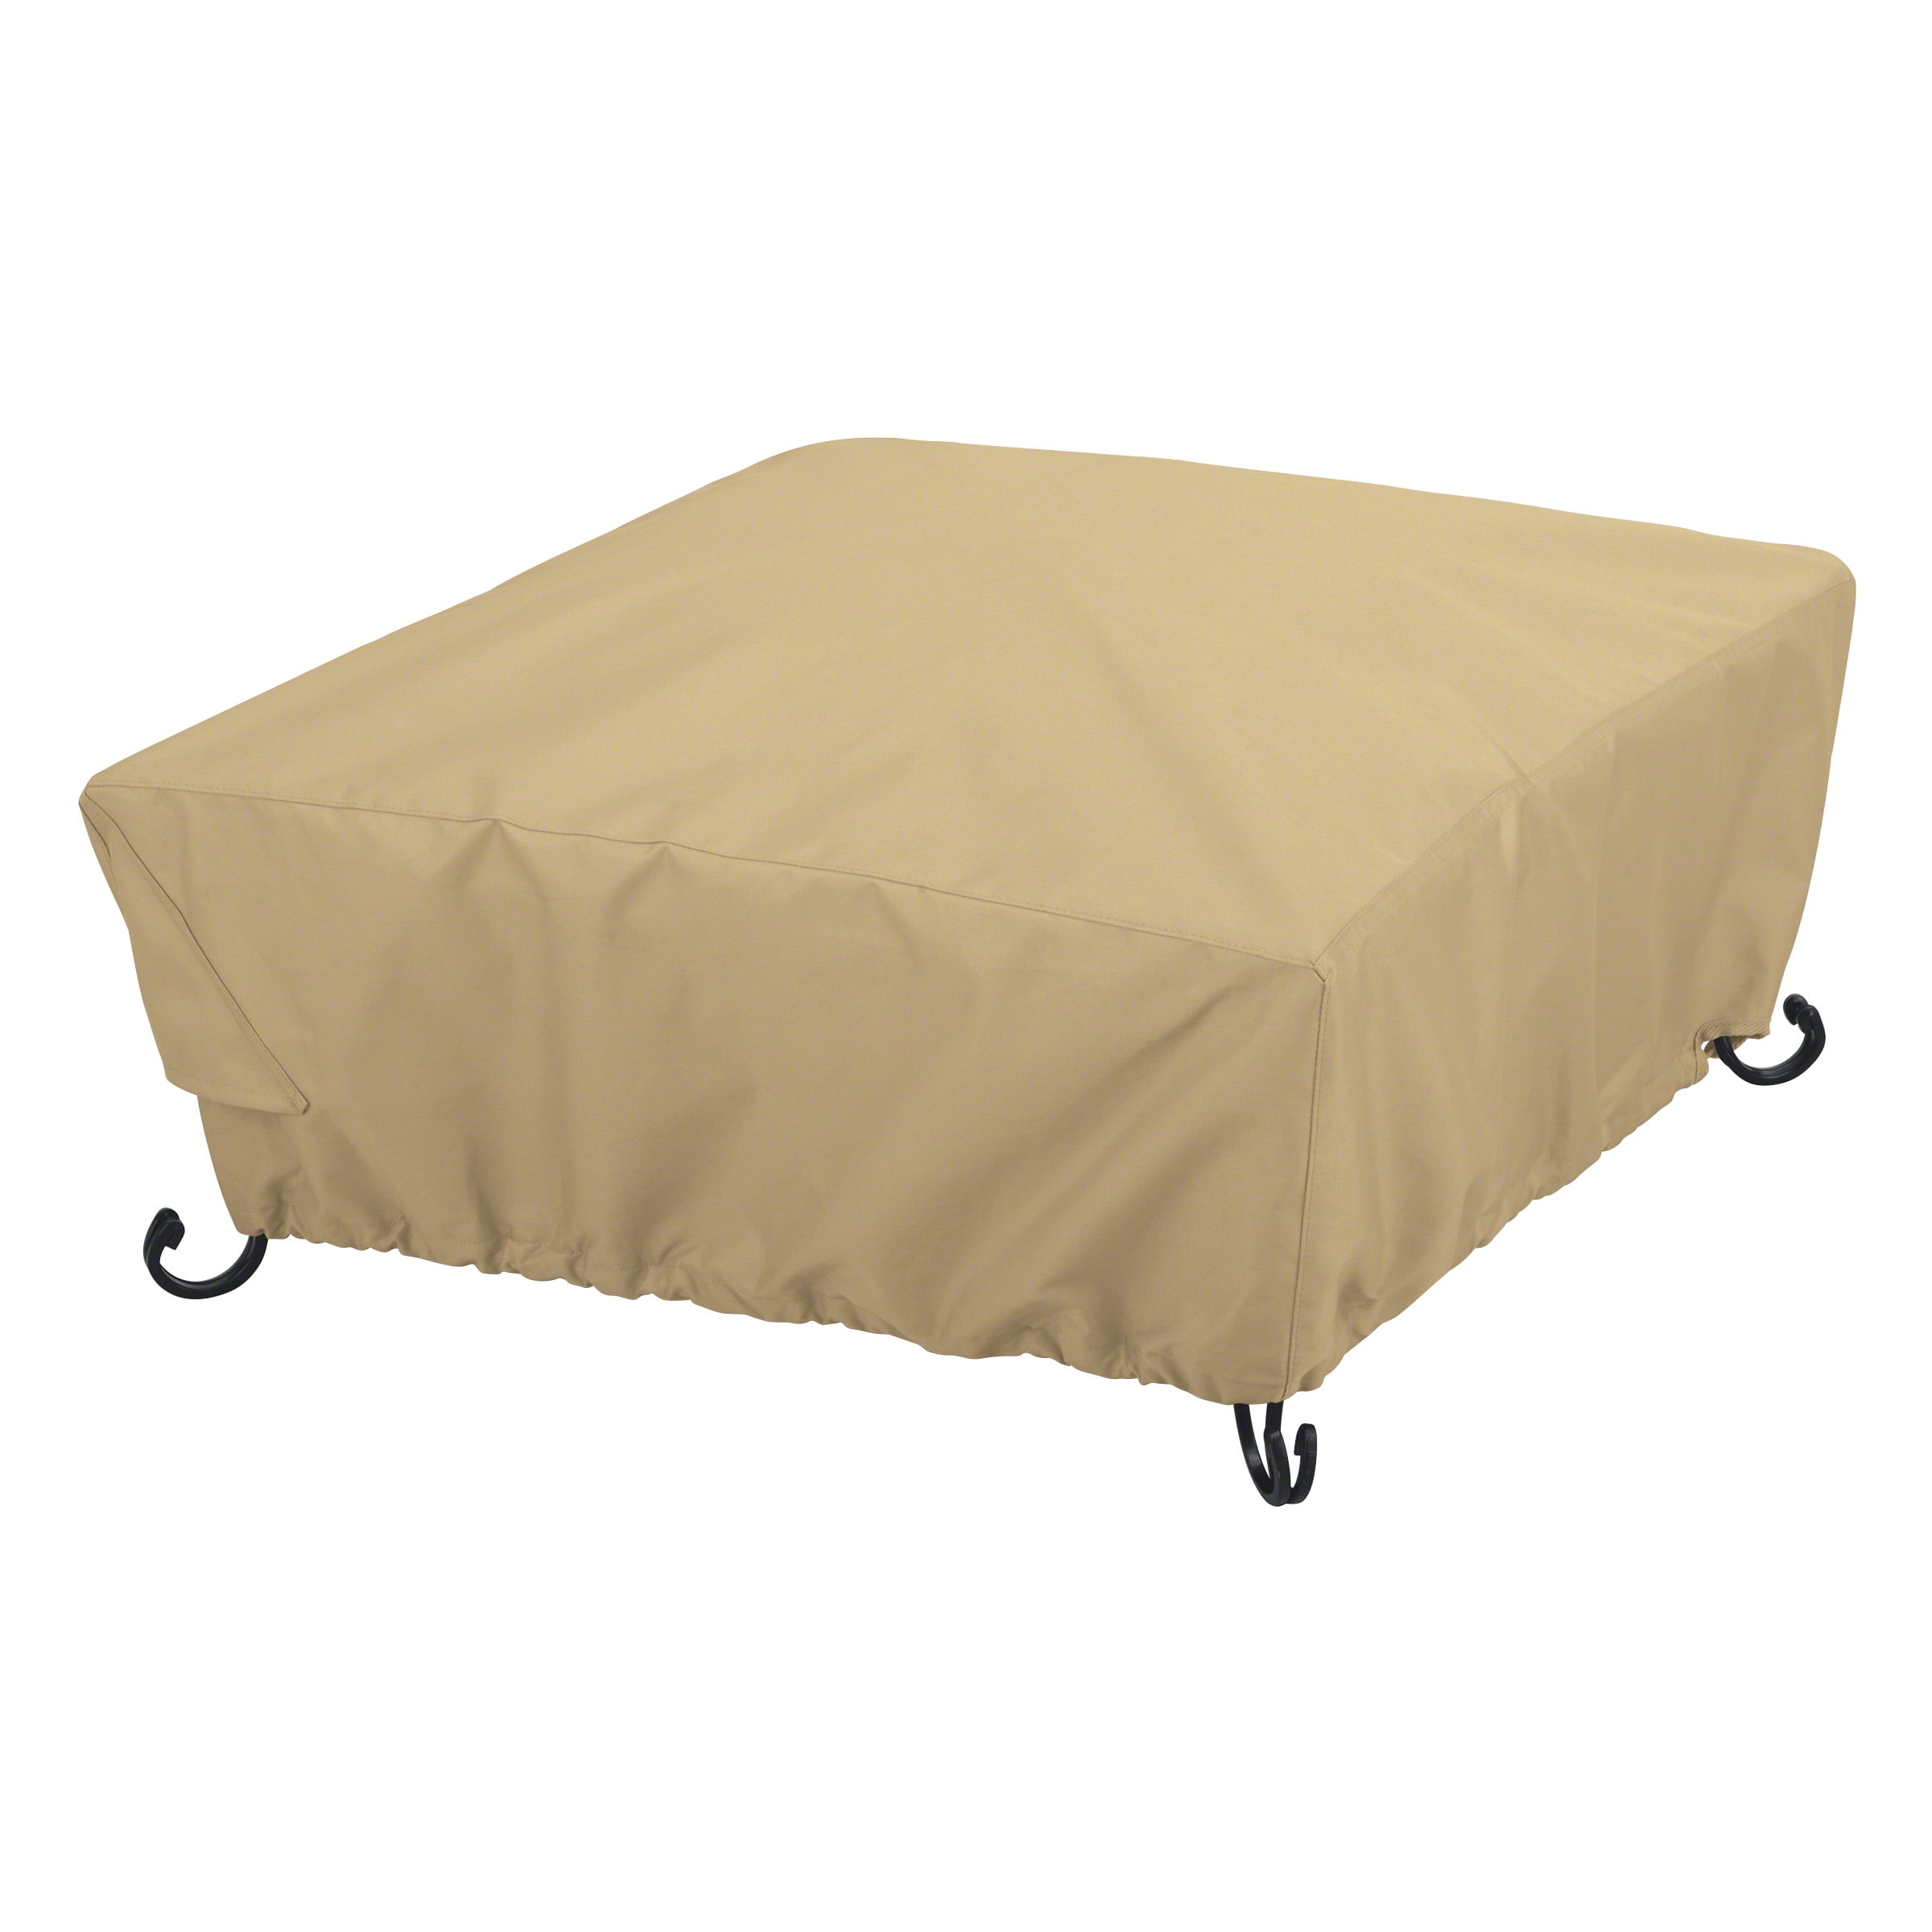 Full Coverage Square Fire Pit Cover, 36 Square Fire Pit Lid